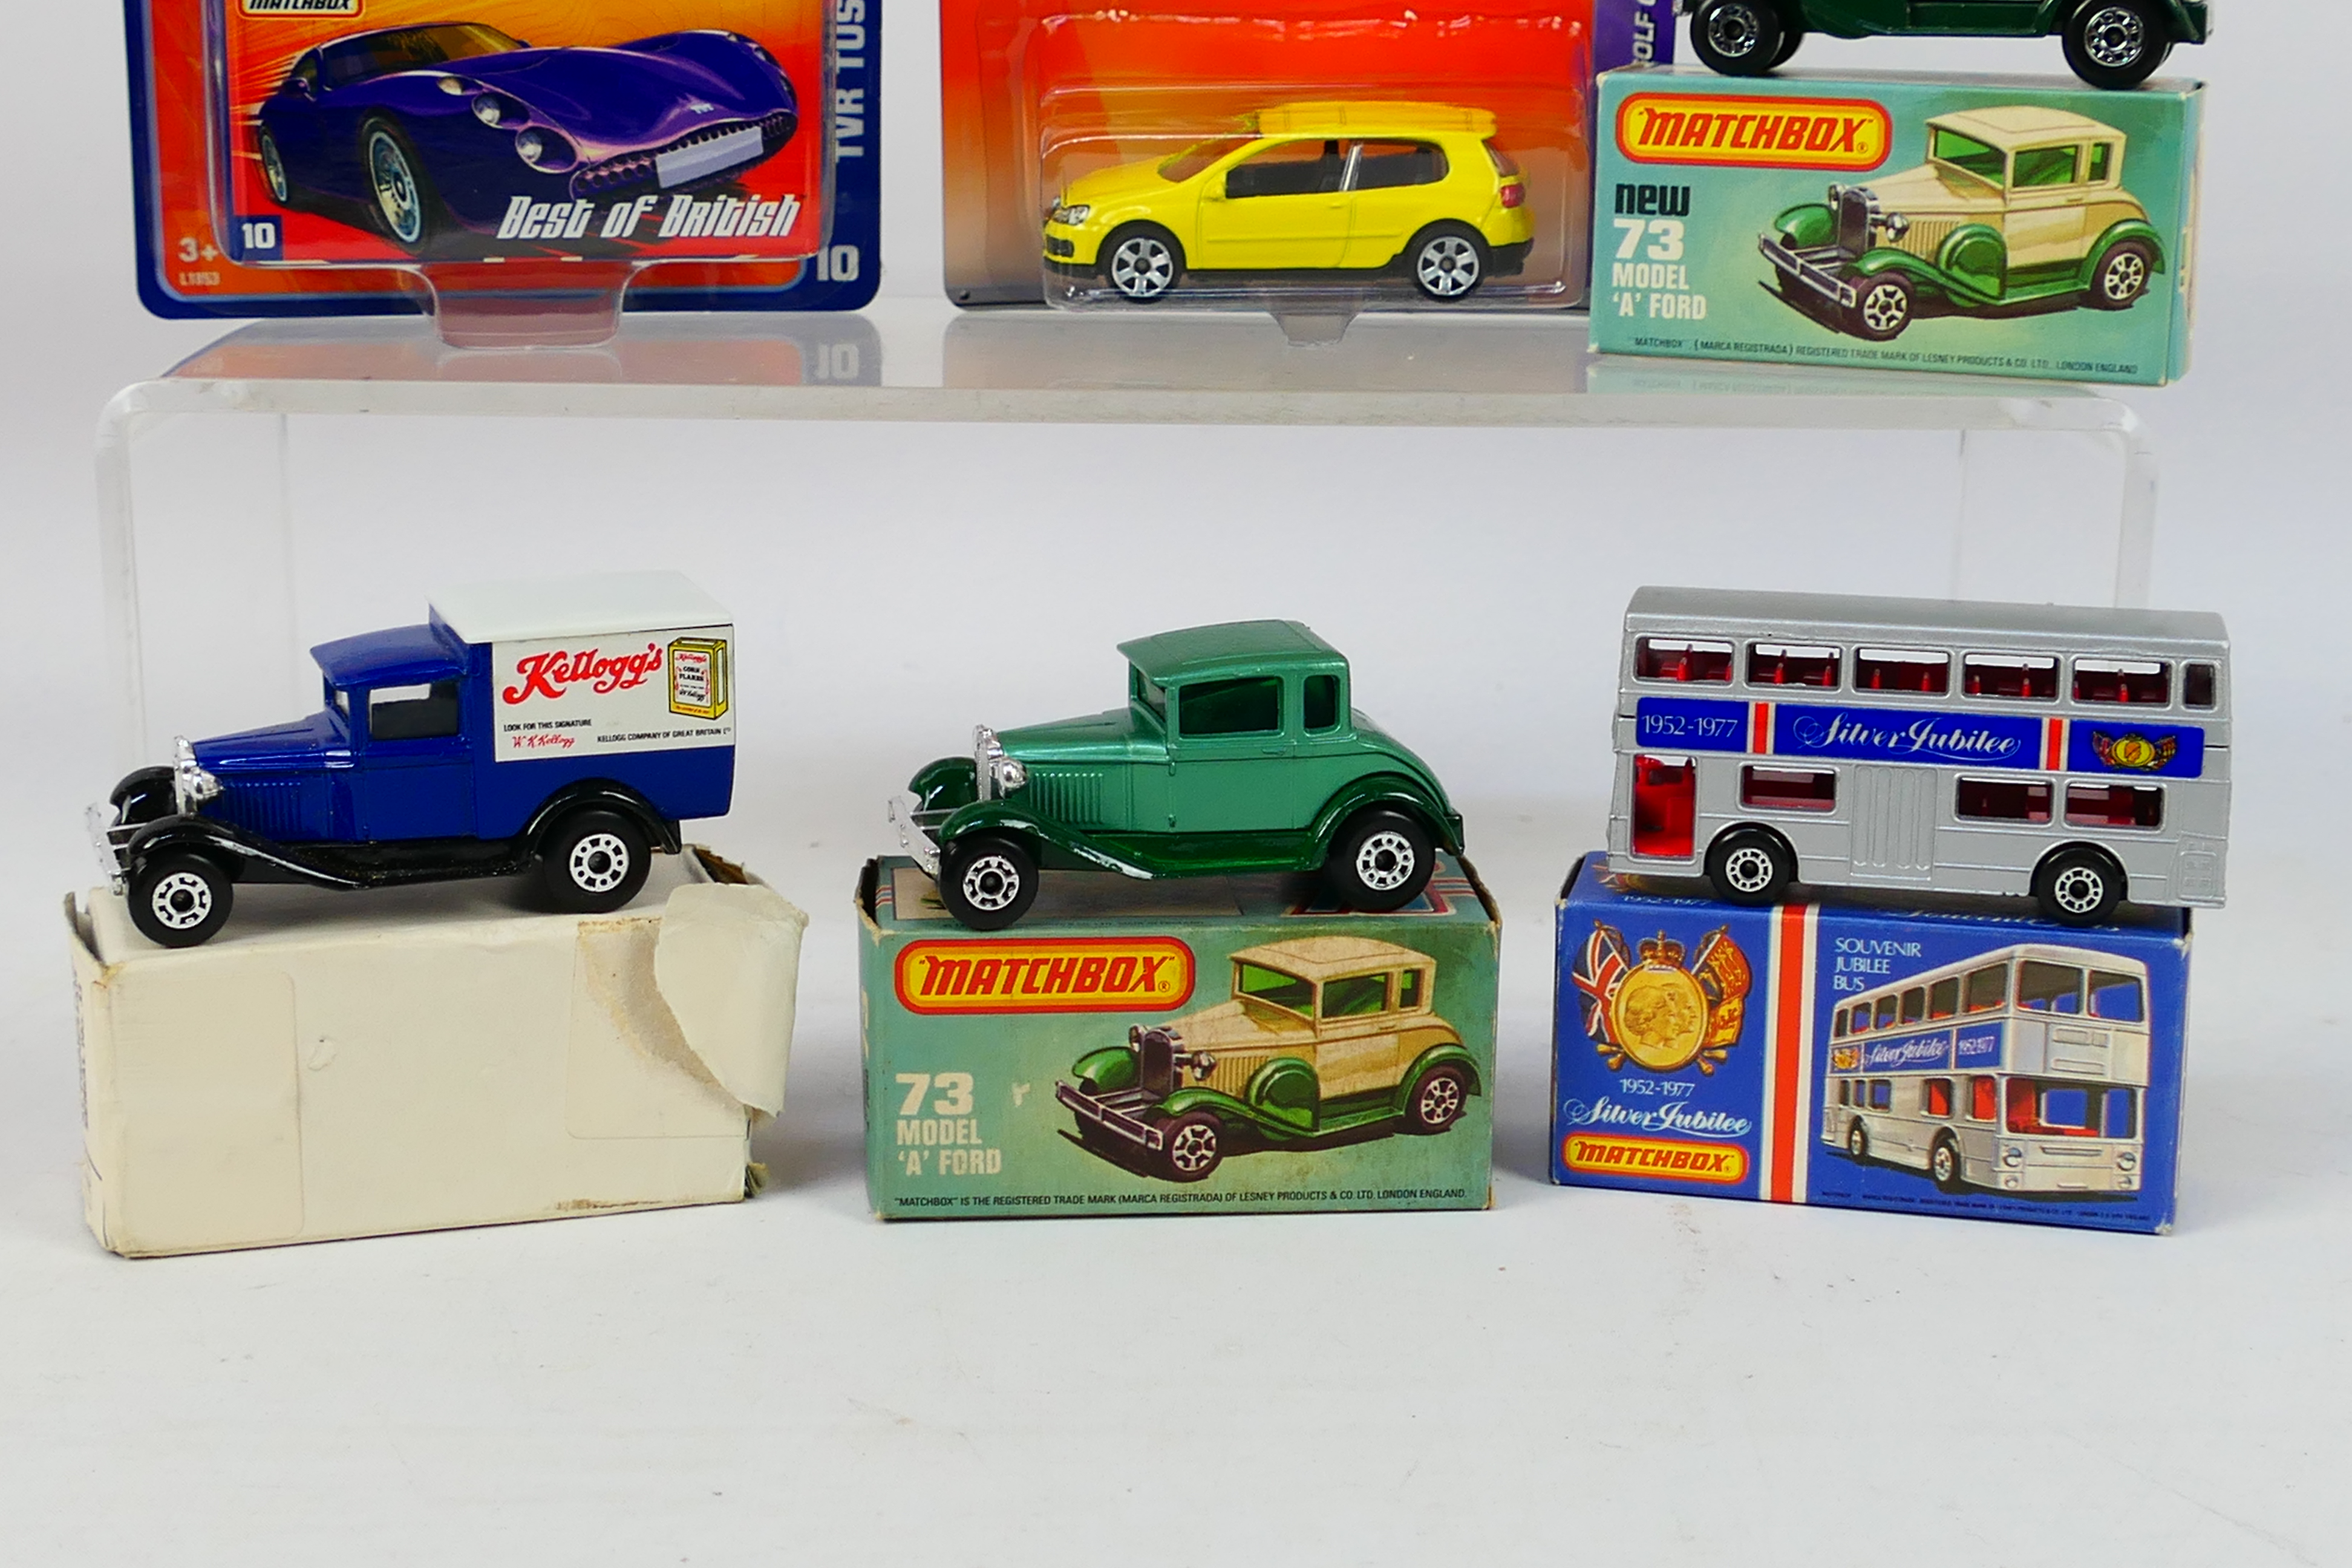 Matchbox - 6 x boxed / carded models, Ford Model A x 2 # 73, Jubilee Bus, Ford Model A van, - Image 3 of 3